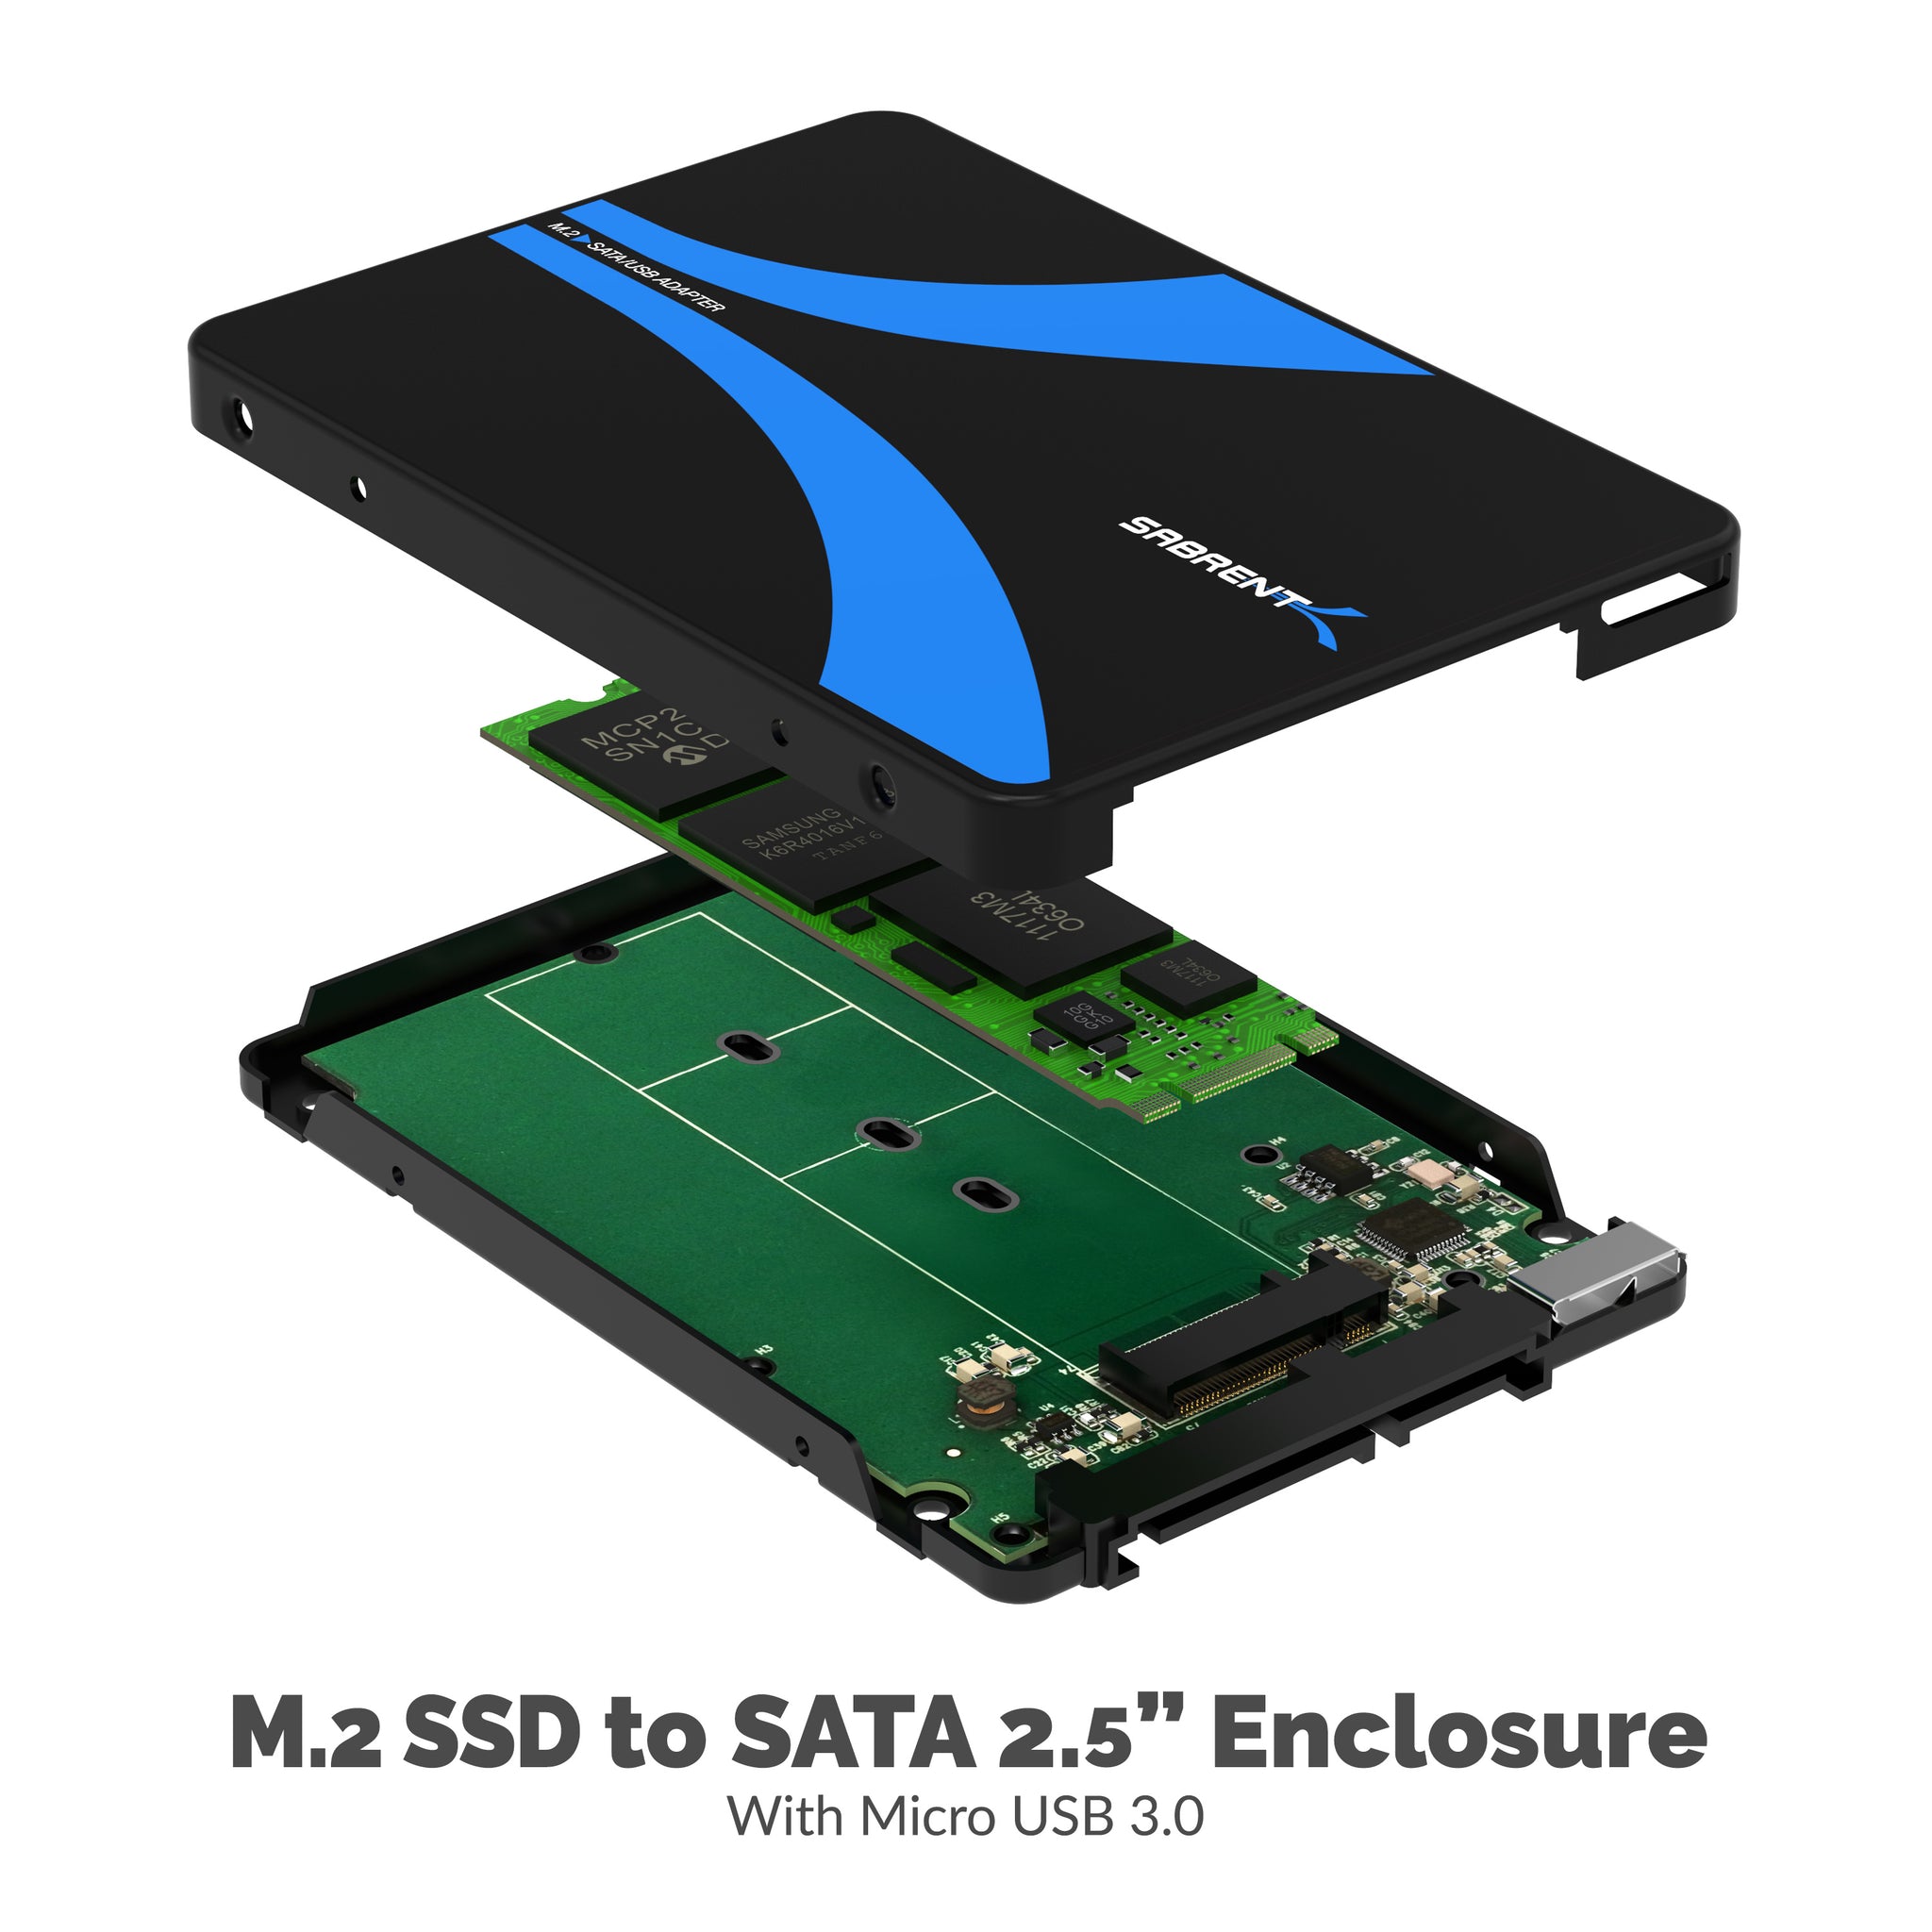 rulle Instruere Daggry M.2 SSD [NGFF] to USB 3.0 / SATA III 2.5-Inch Enclosure Adapter - Sabrent